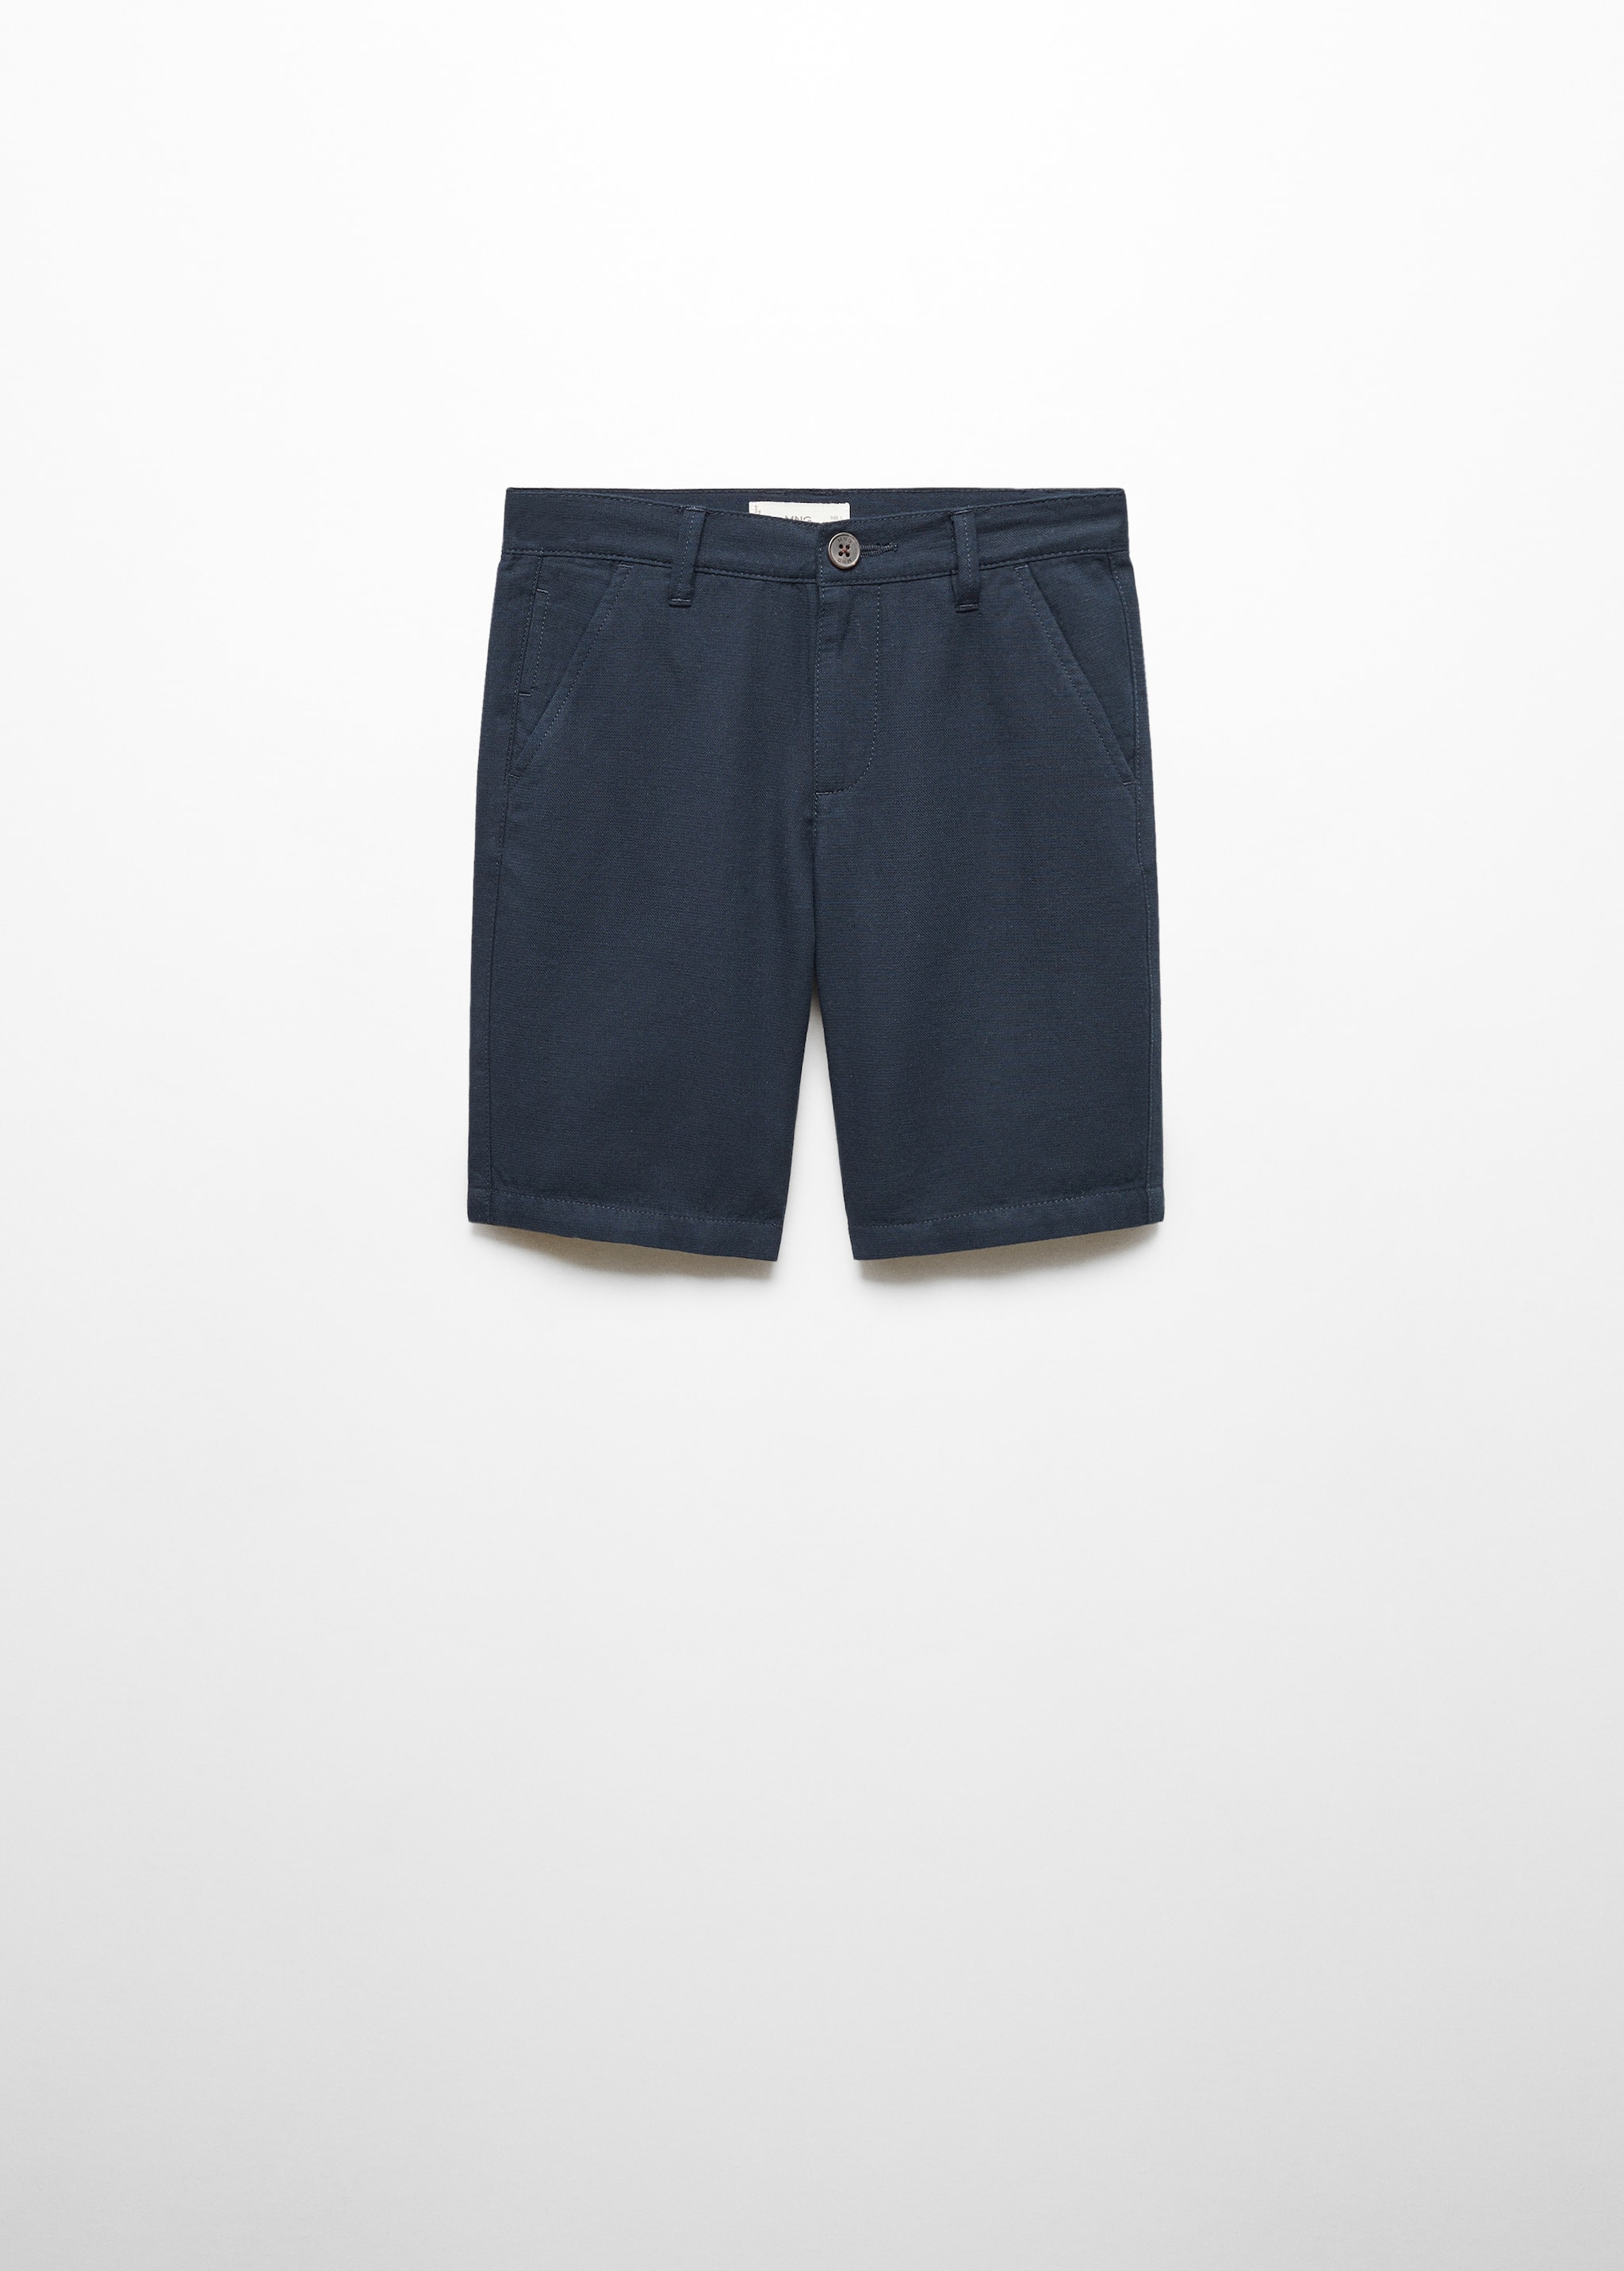 Linen chino Bermuda shorts - Article without model